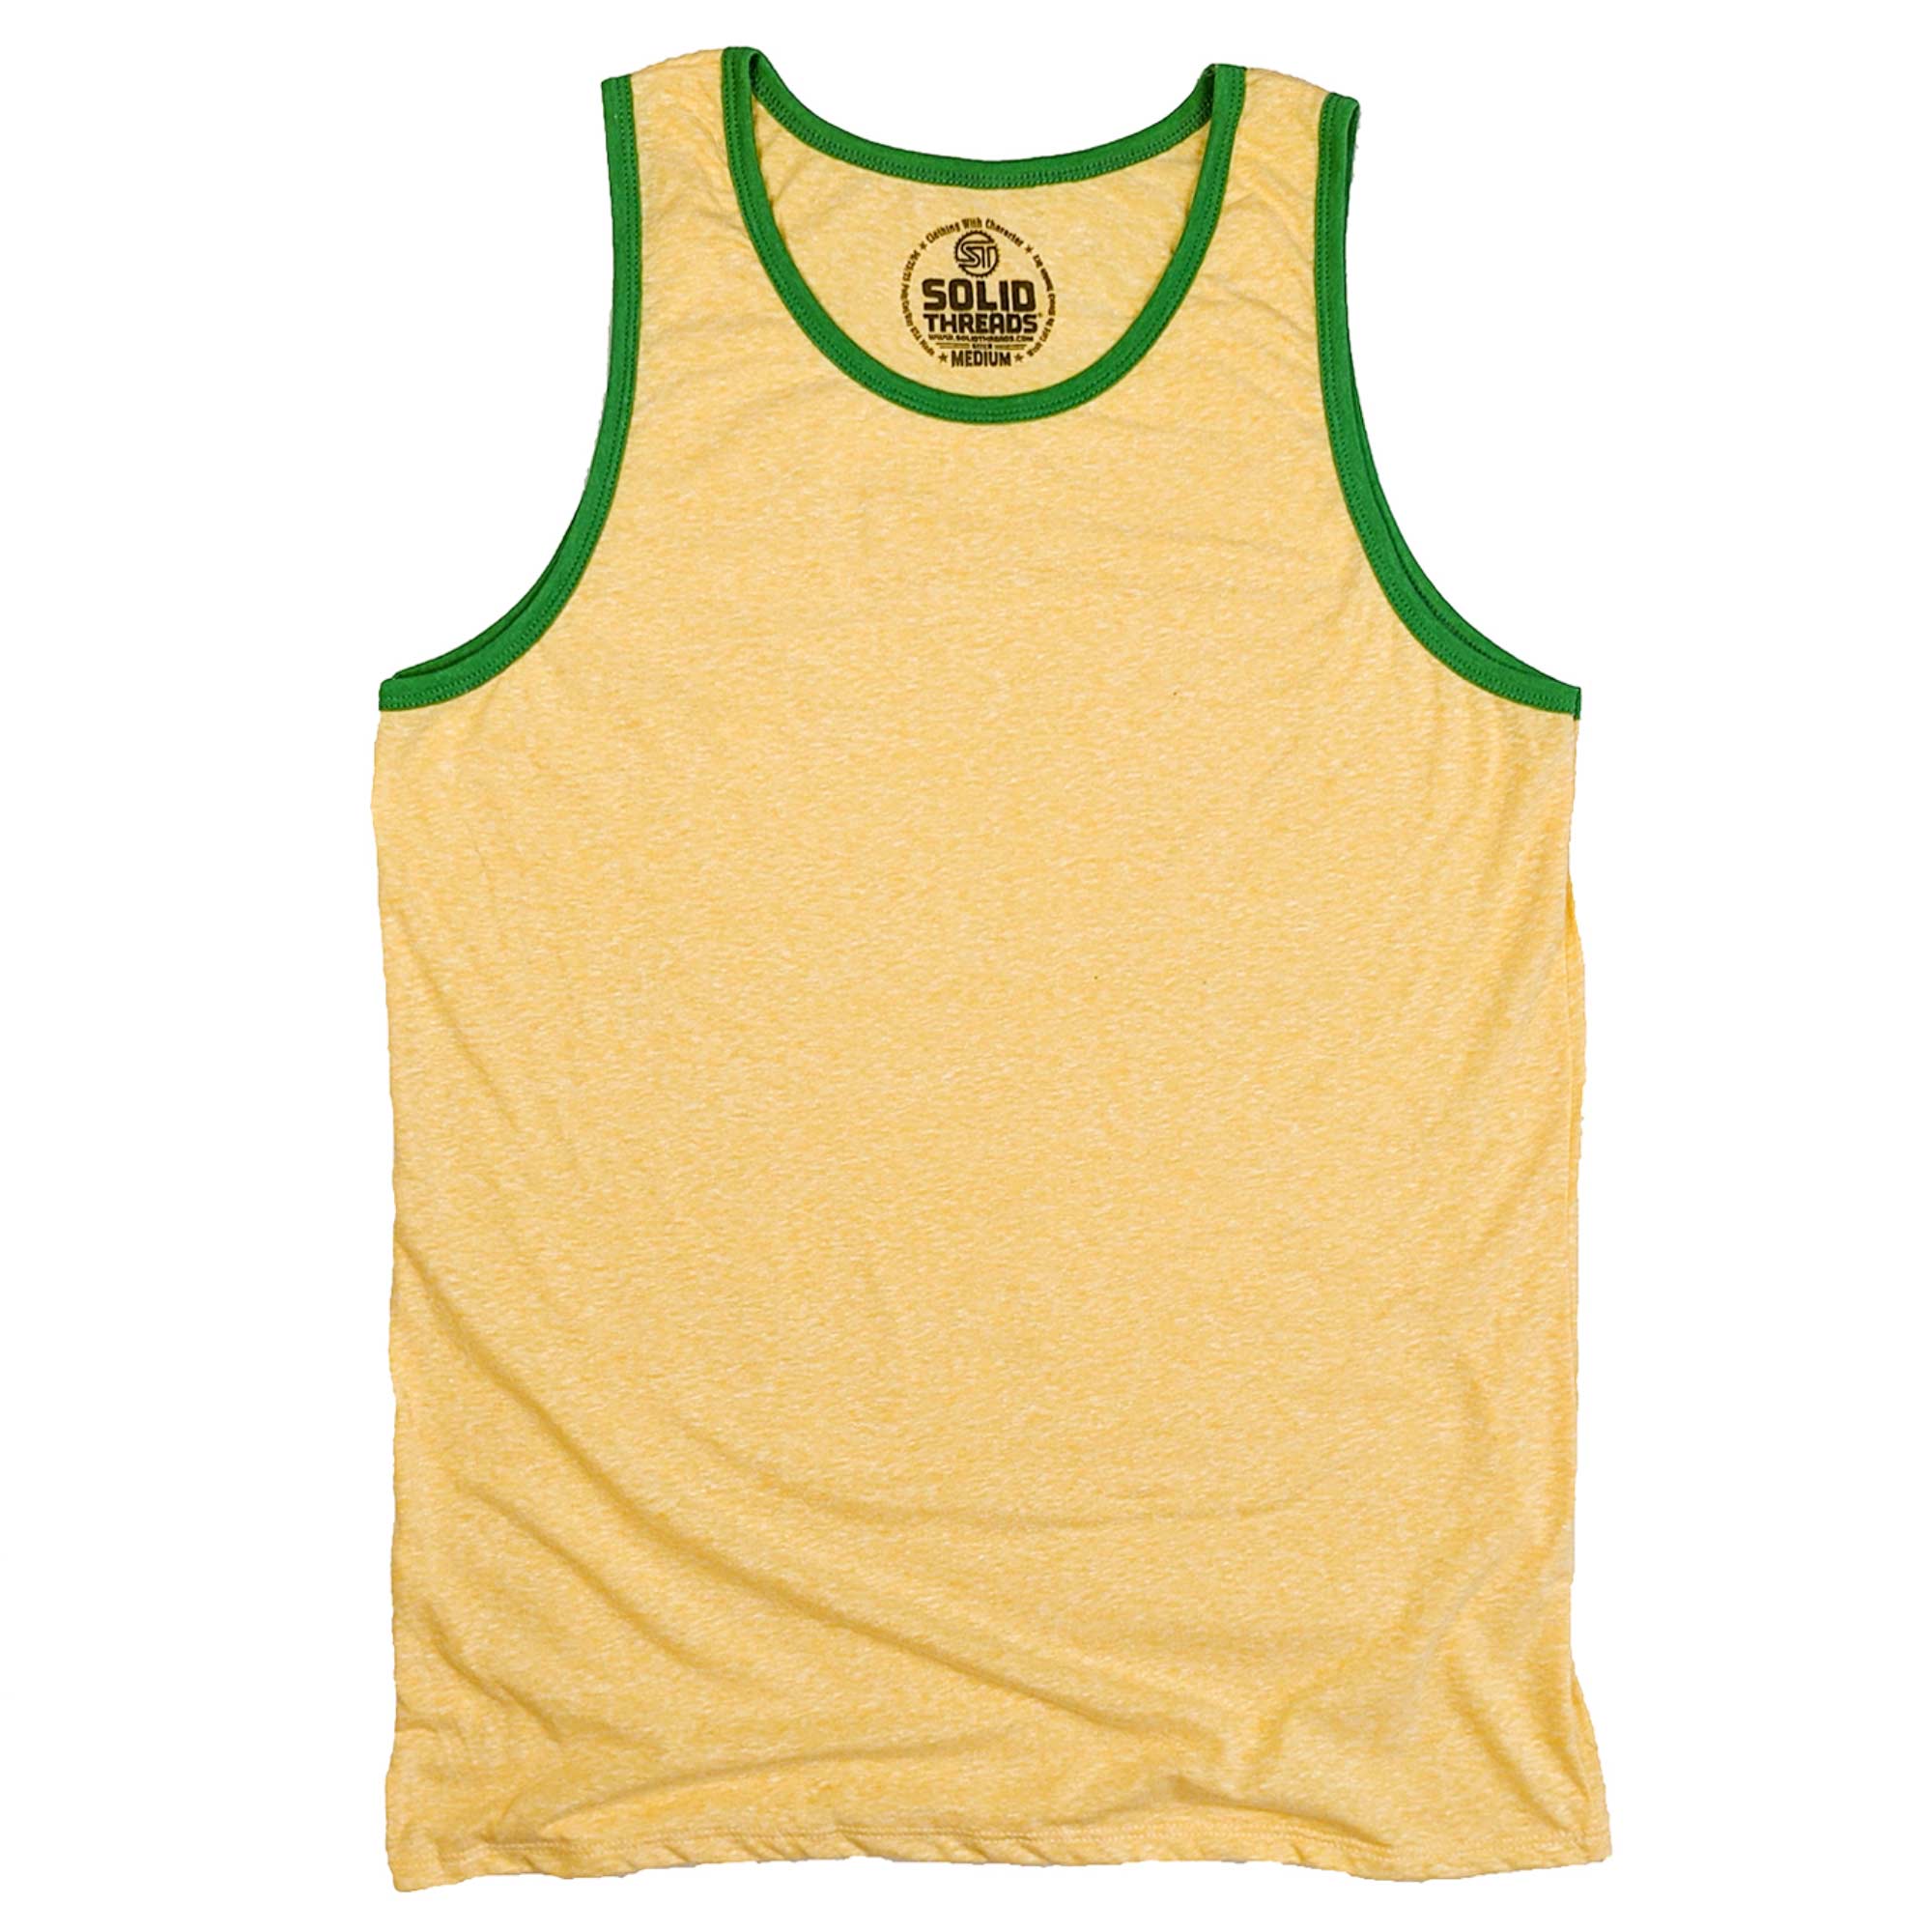 Men's Solid Threads Retro Ringer Tank Top Triblend Gold/Kelly | Vintage Inspired USA Made Tank Top